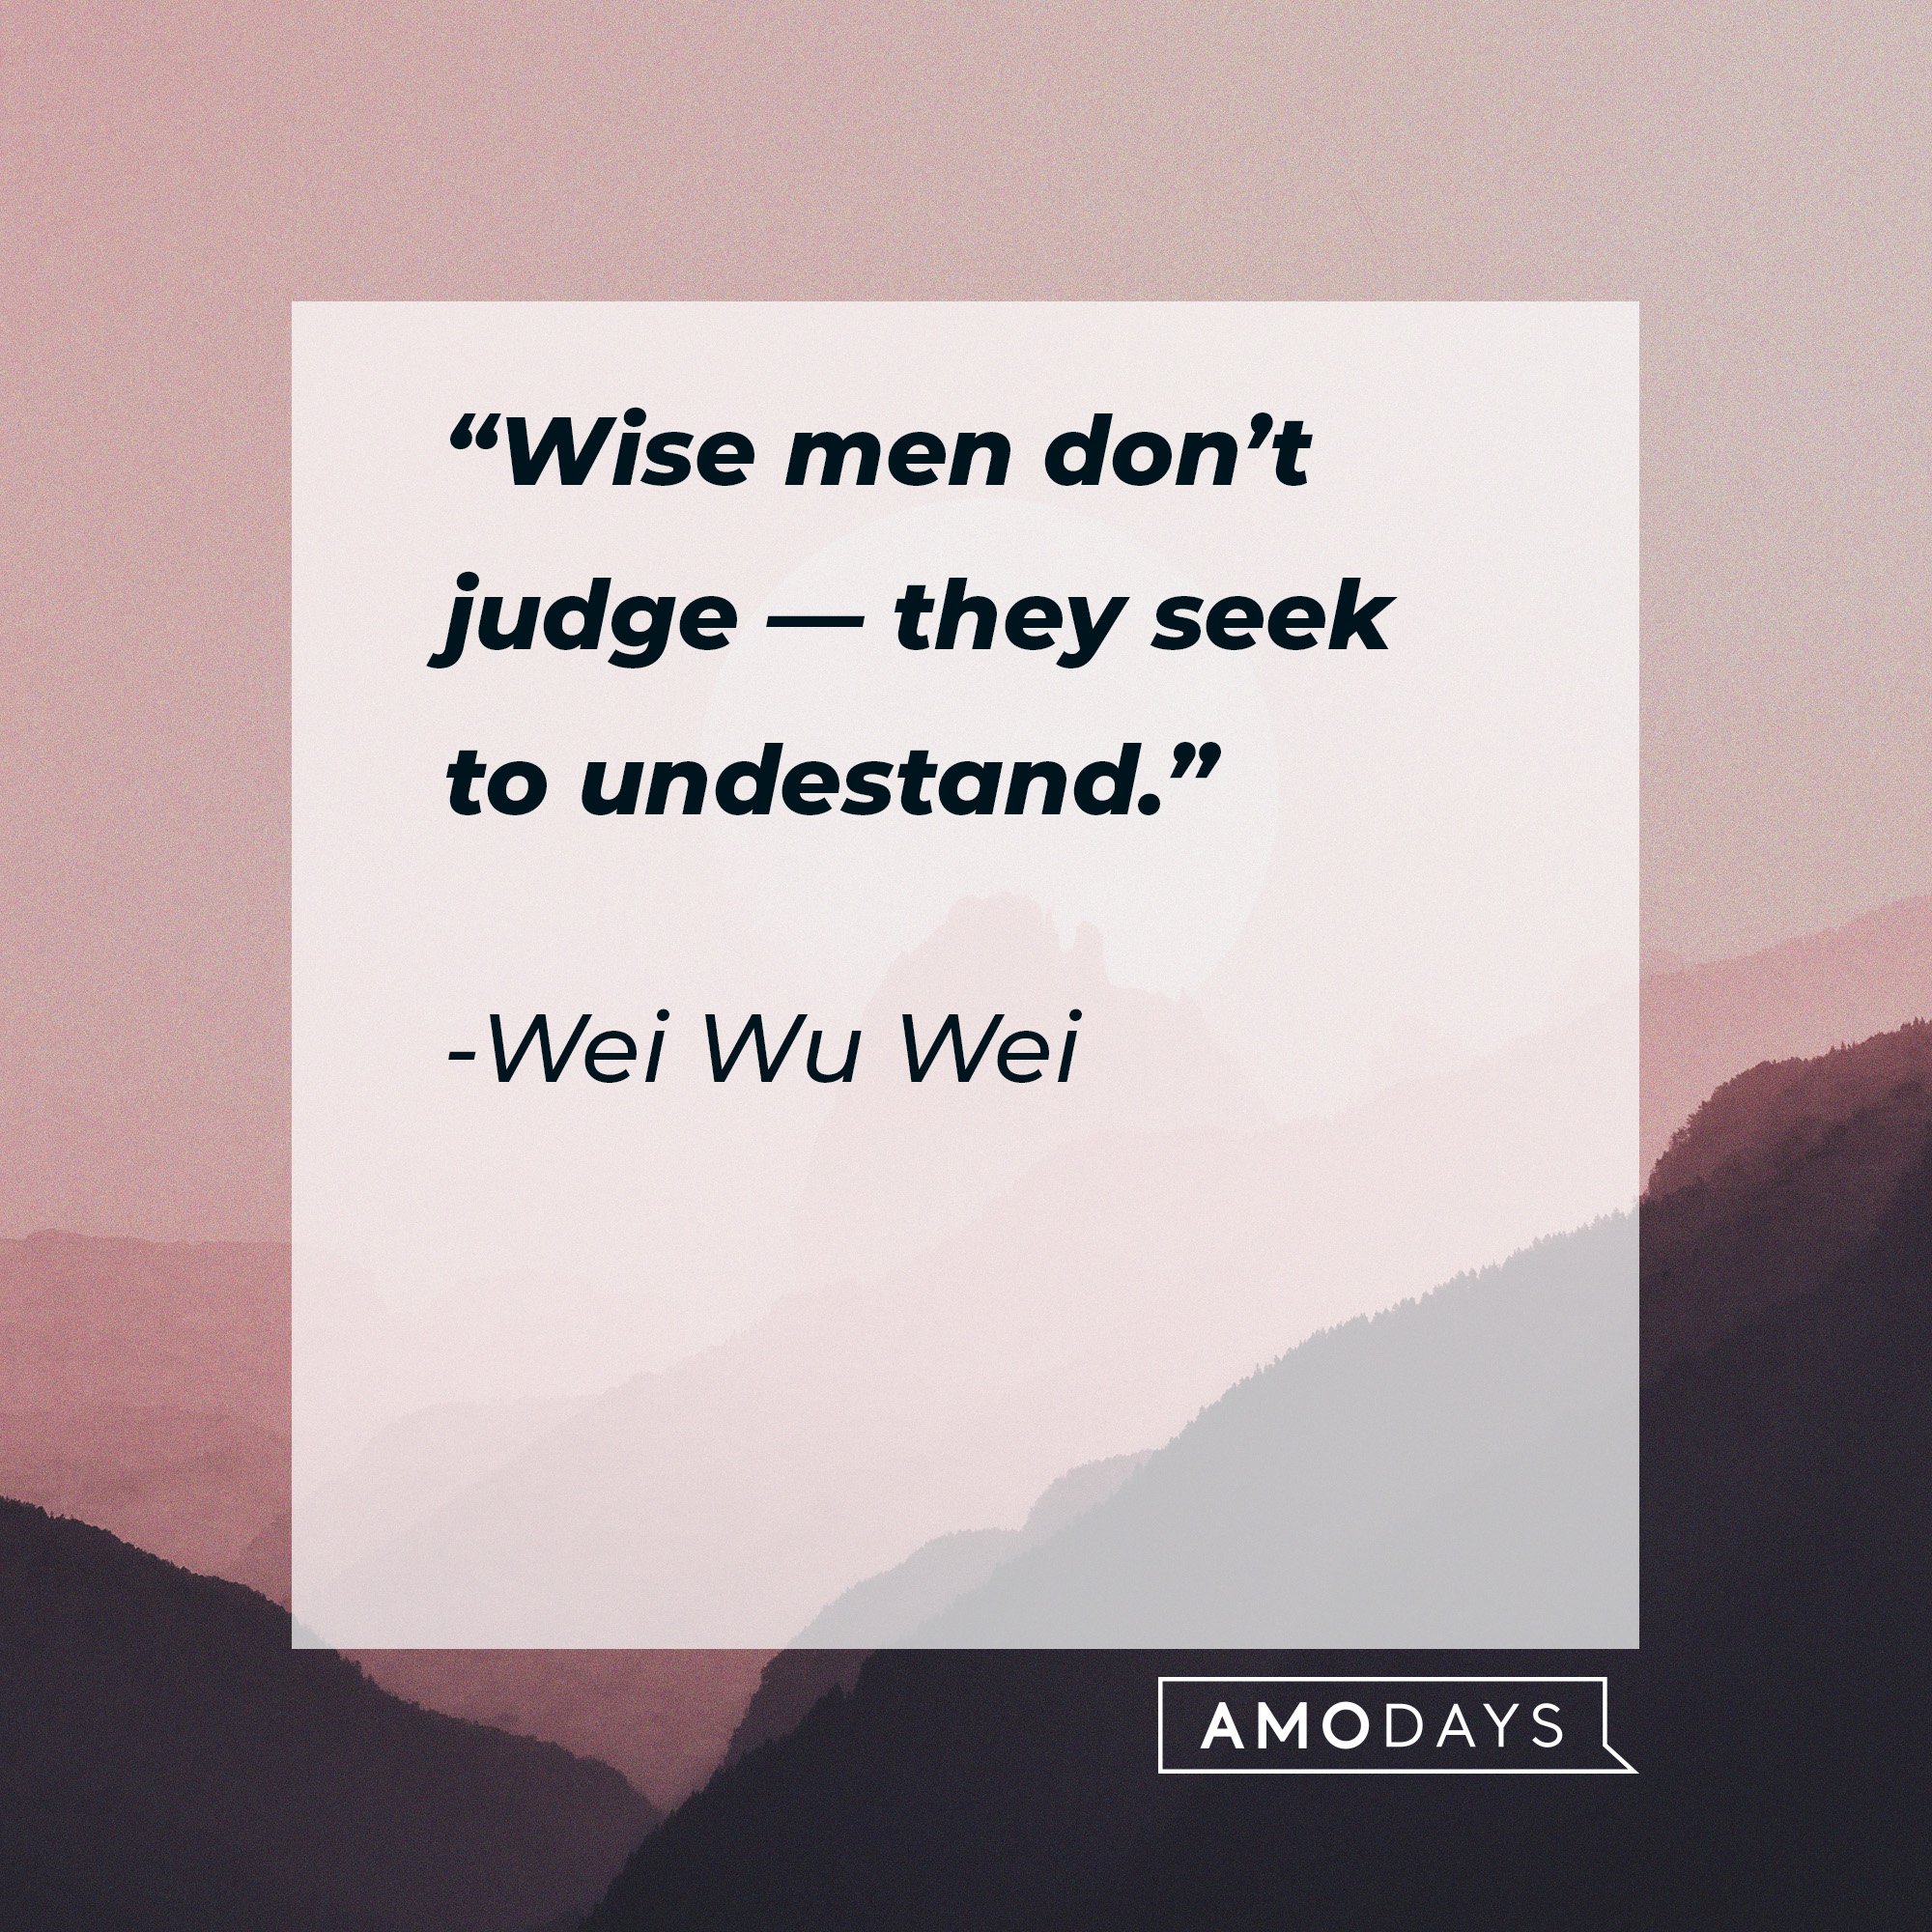 Wei Wu Wei's quote: “Wise men don’t judge — they seek to understand.” | Image: AmoDays